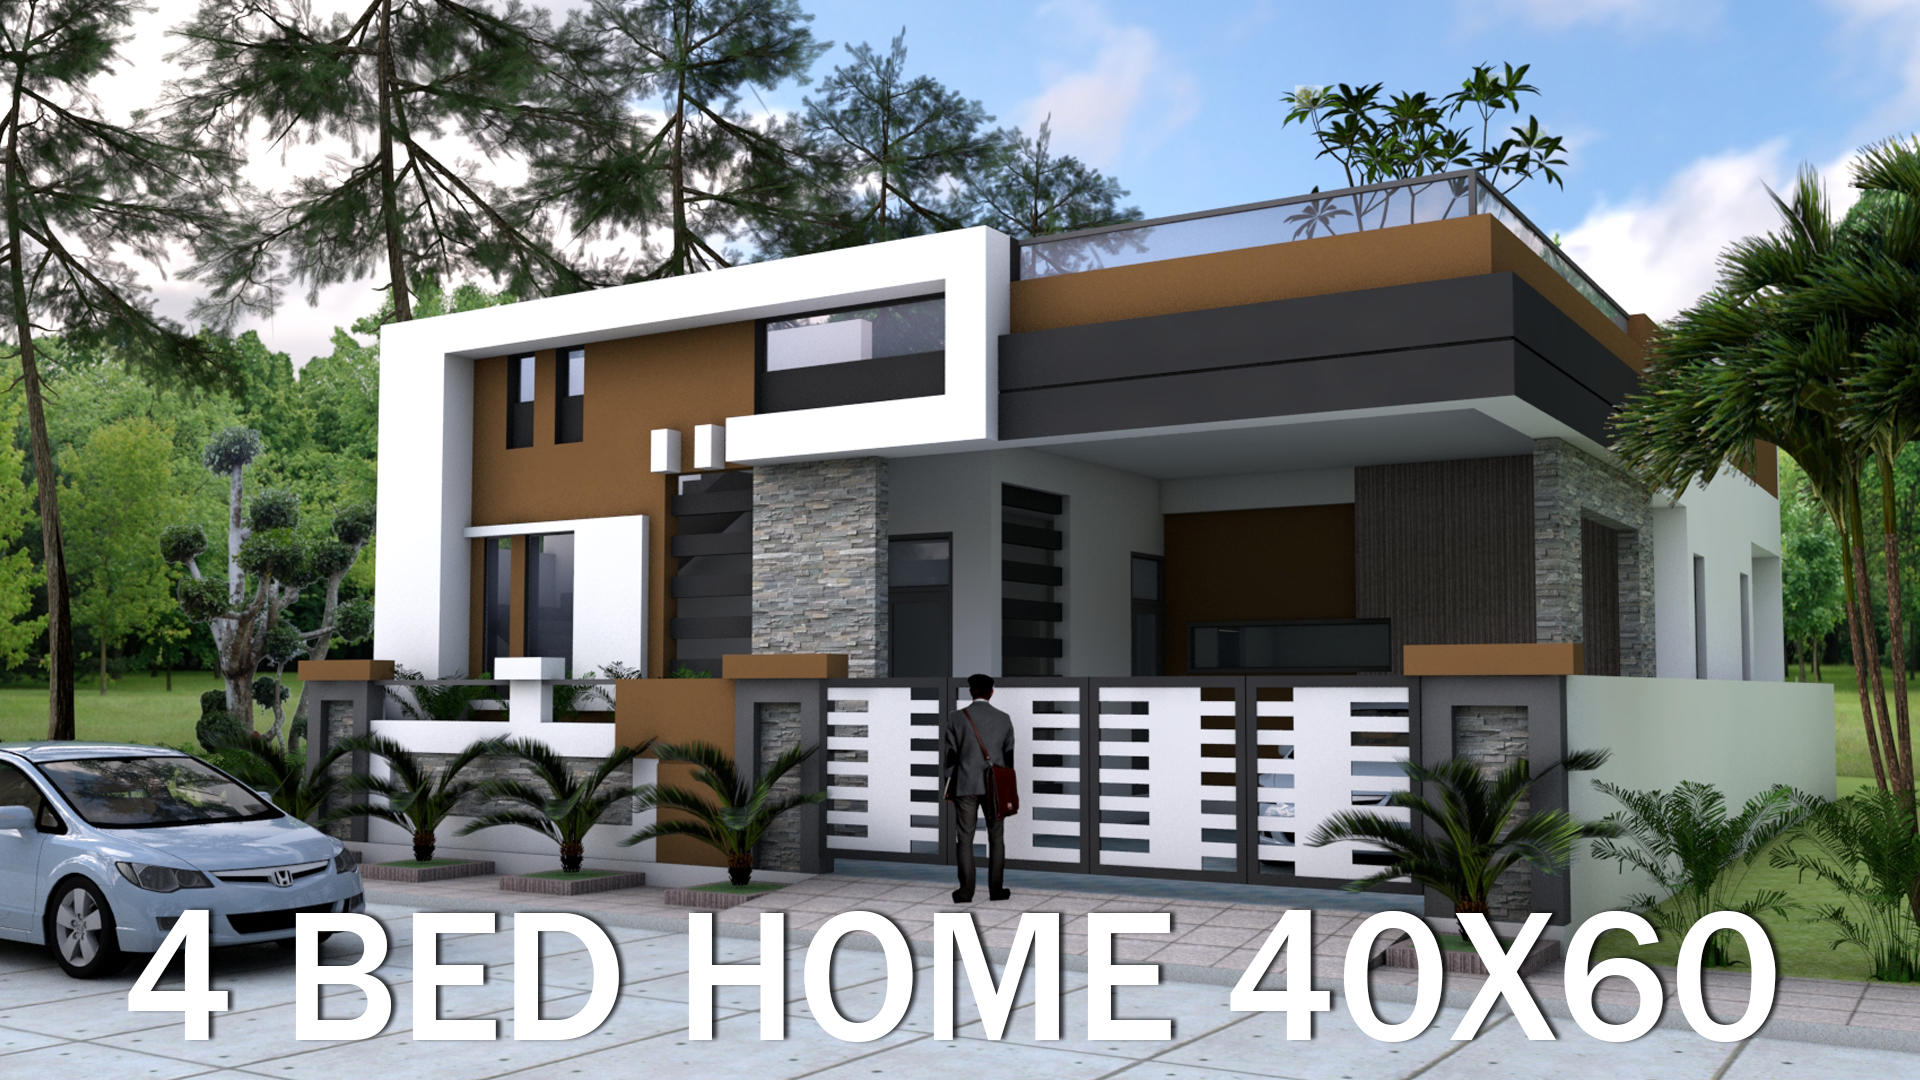 Home Design 40x60F with 4 Bedrooms - SamHousePlans